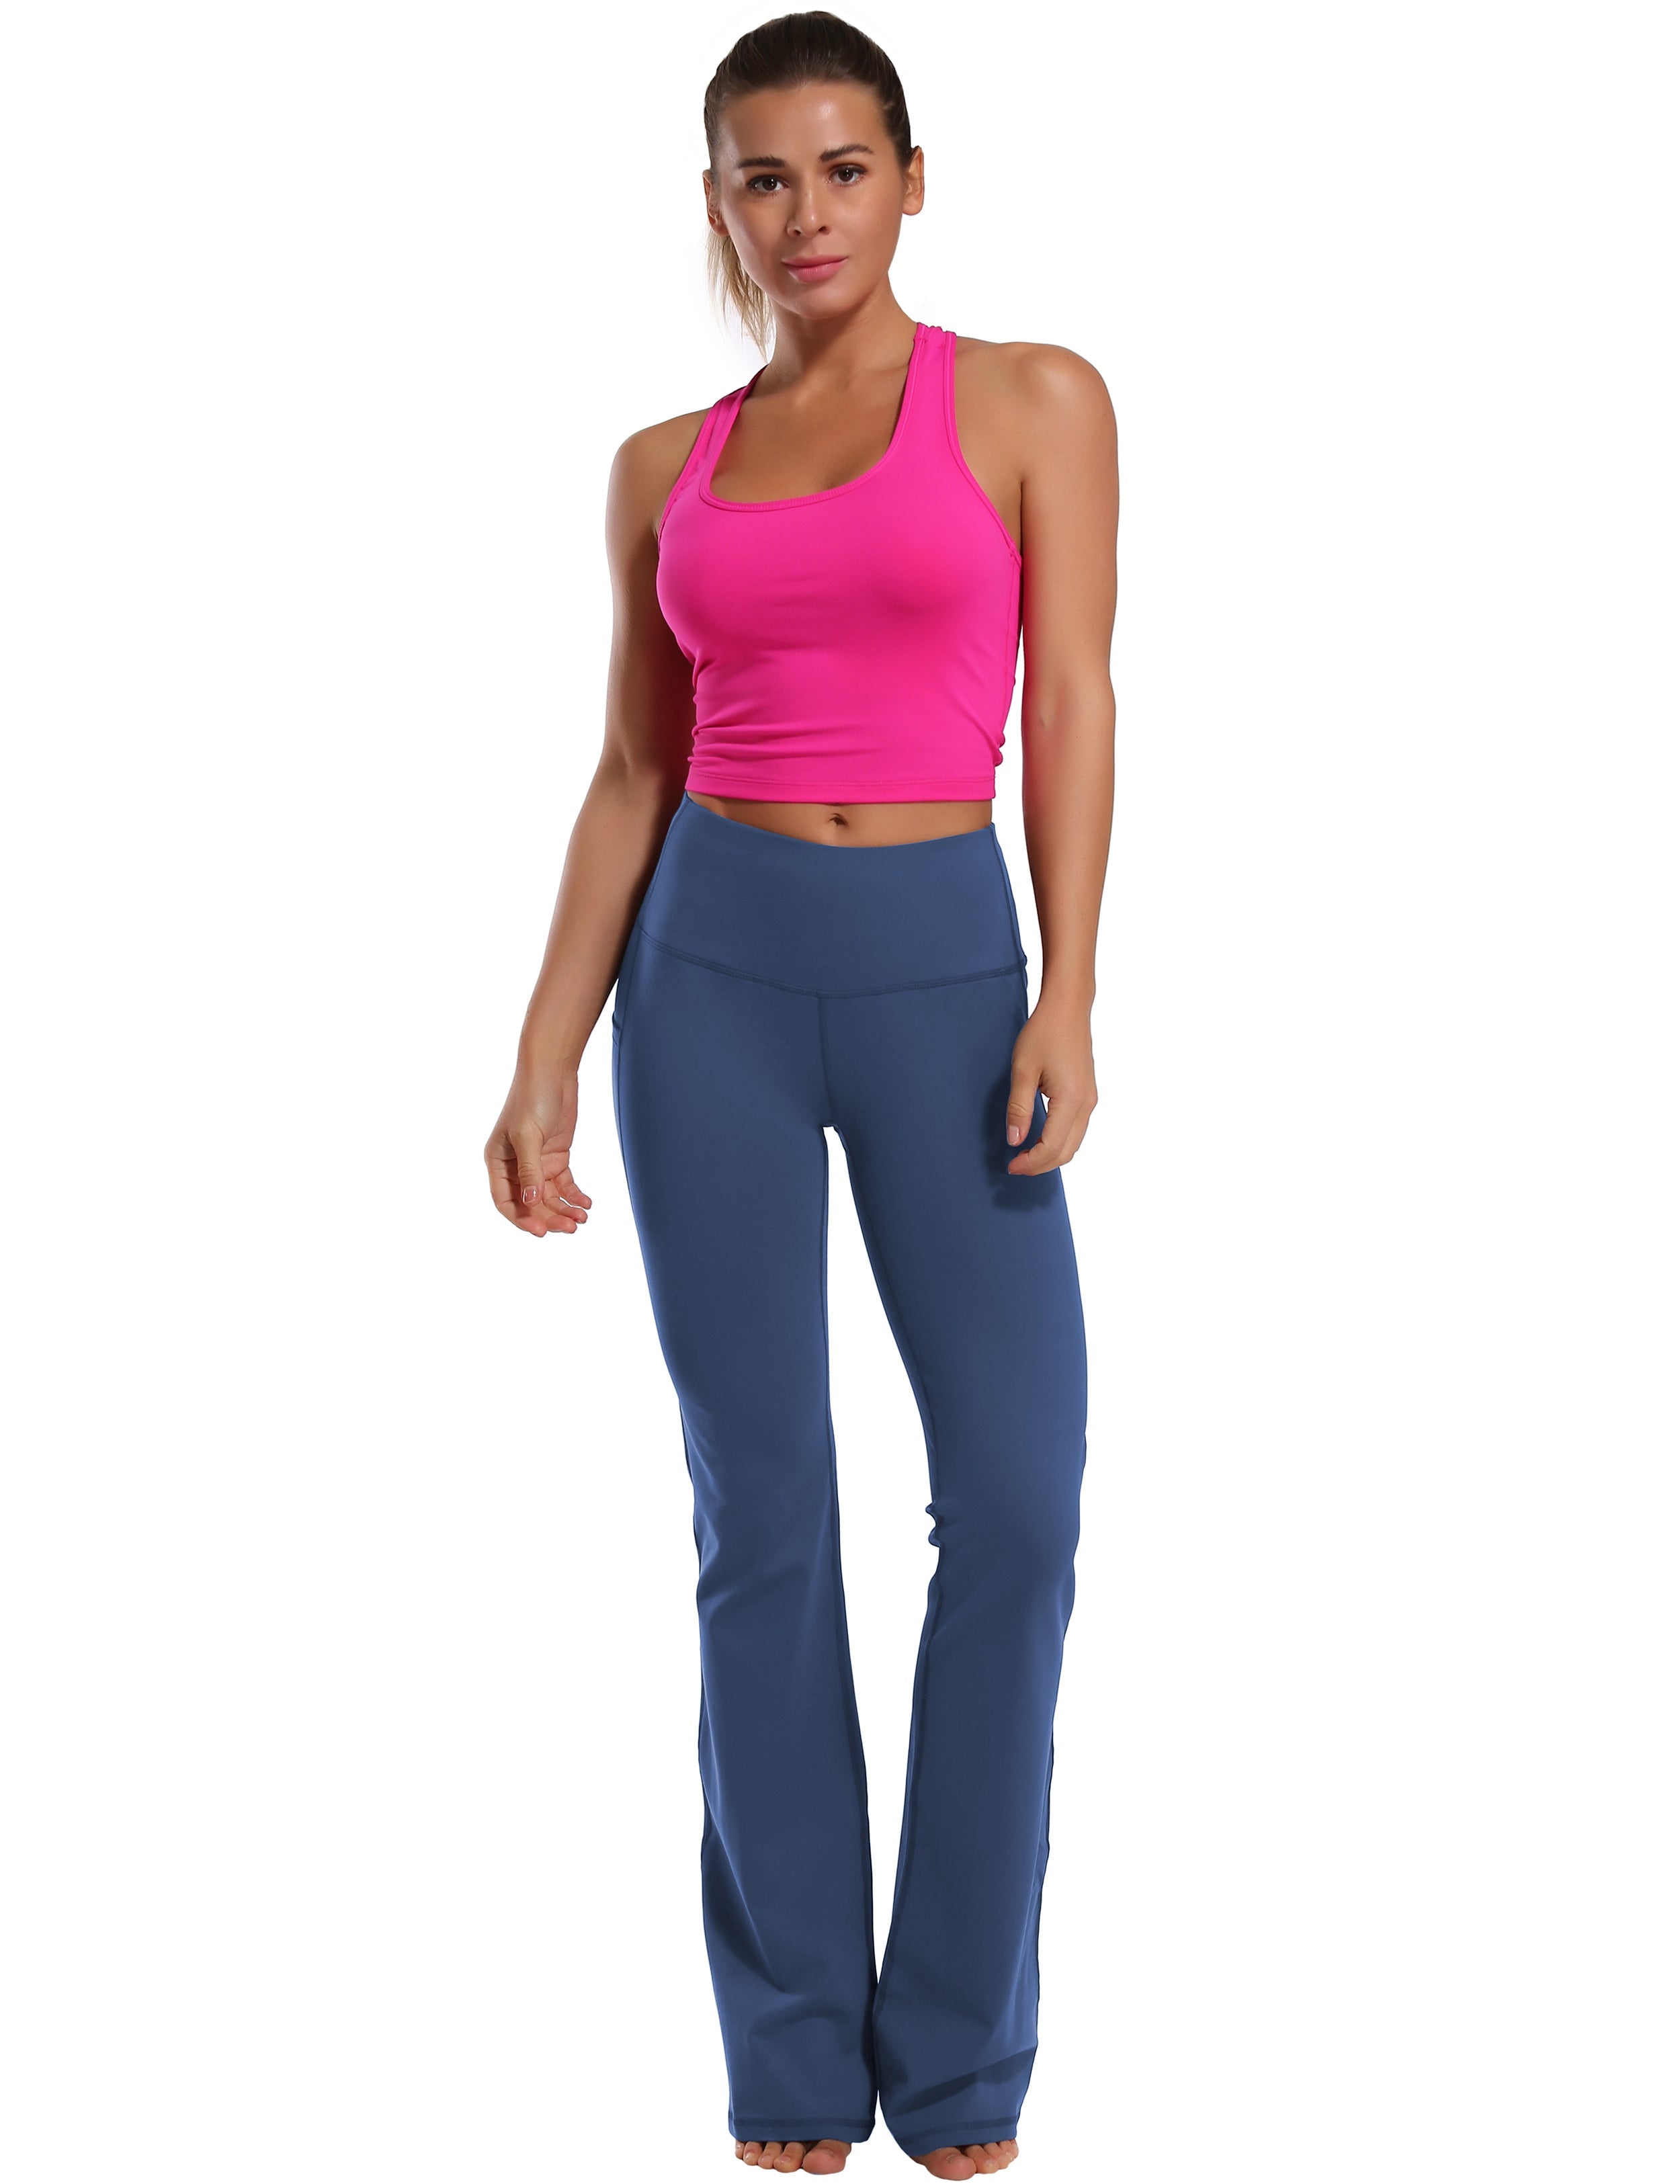 139 Side Pockets Bootcut Leggings purplishblue 87%Nylon/13%Spandex Fabric doesn't attract lint easily 4-way stretch No see-through Moisture-wicking Tummy control Inner pocket Four lengths